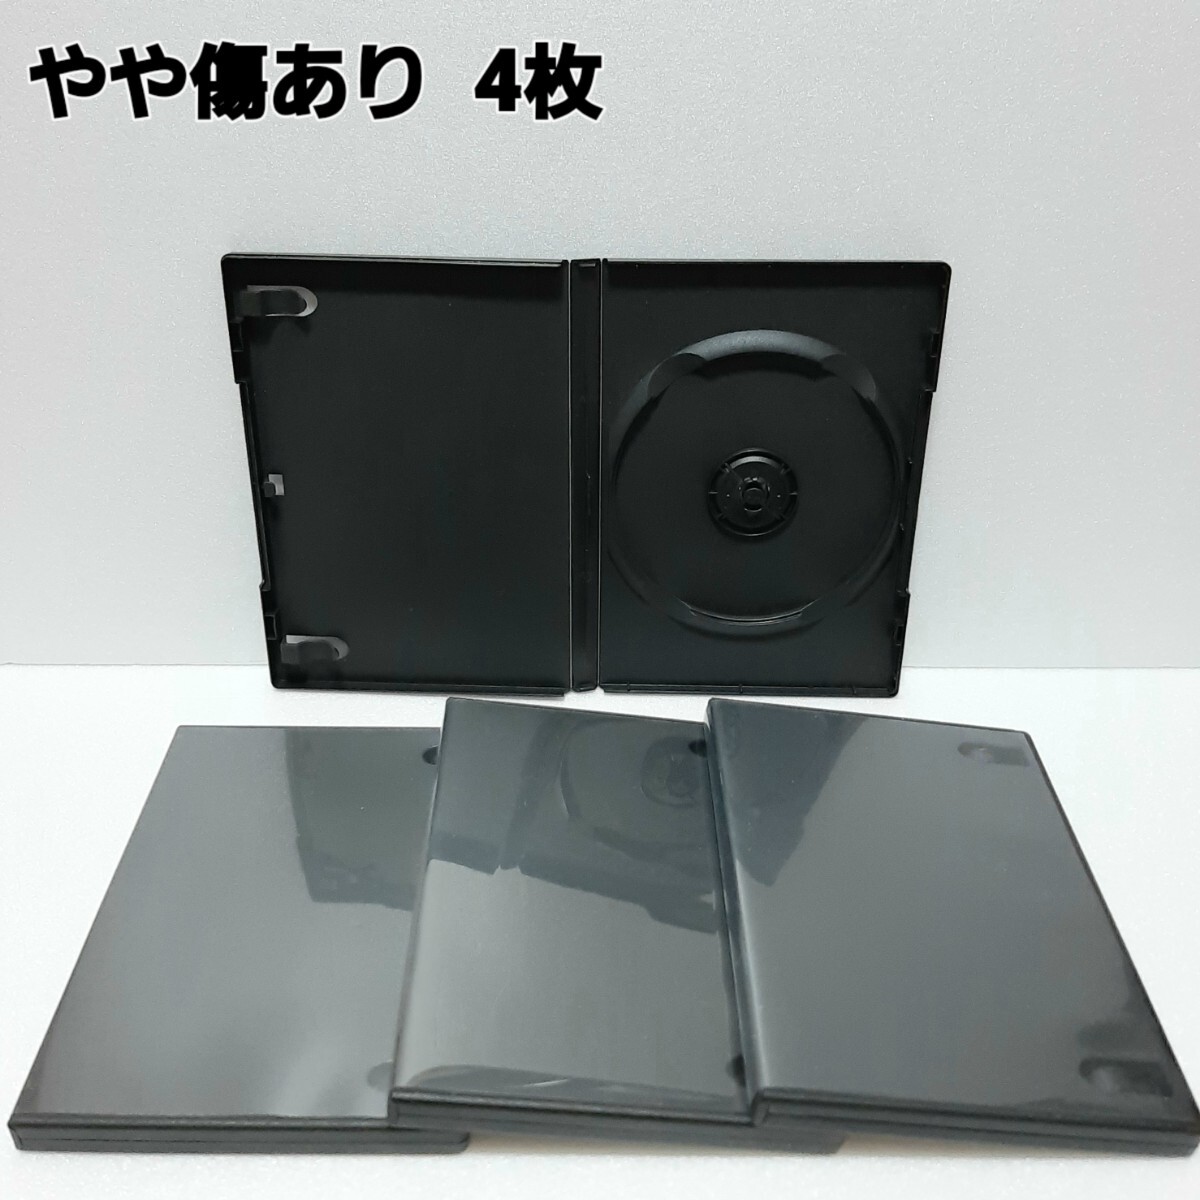 DVD empty case 1 pcs storage ×4 sheets black used [ a little scratch equipped ]JD4